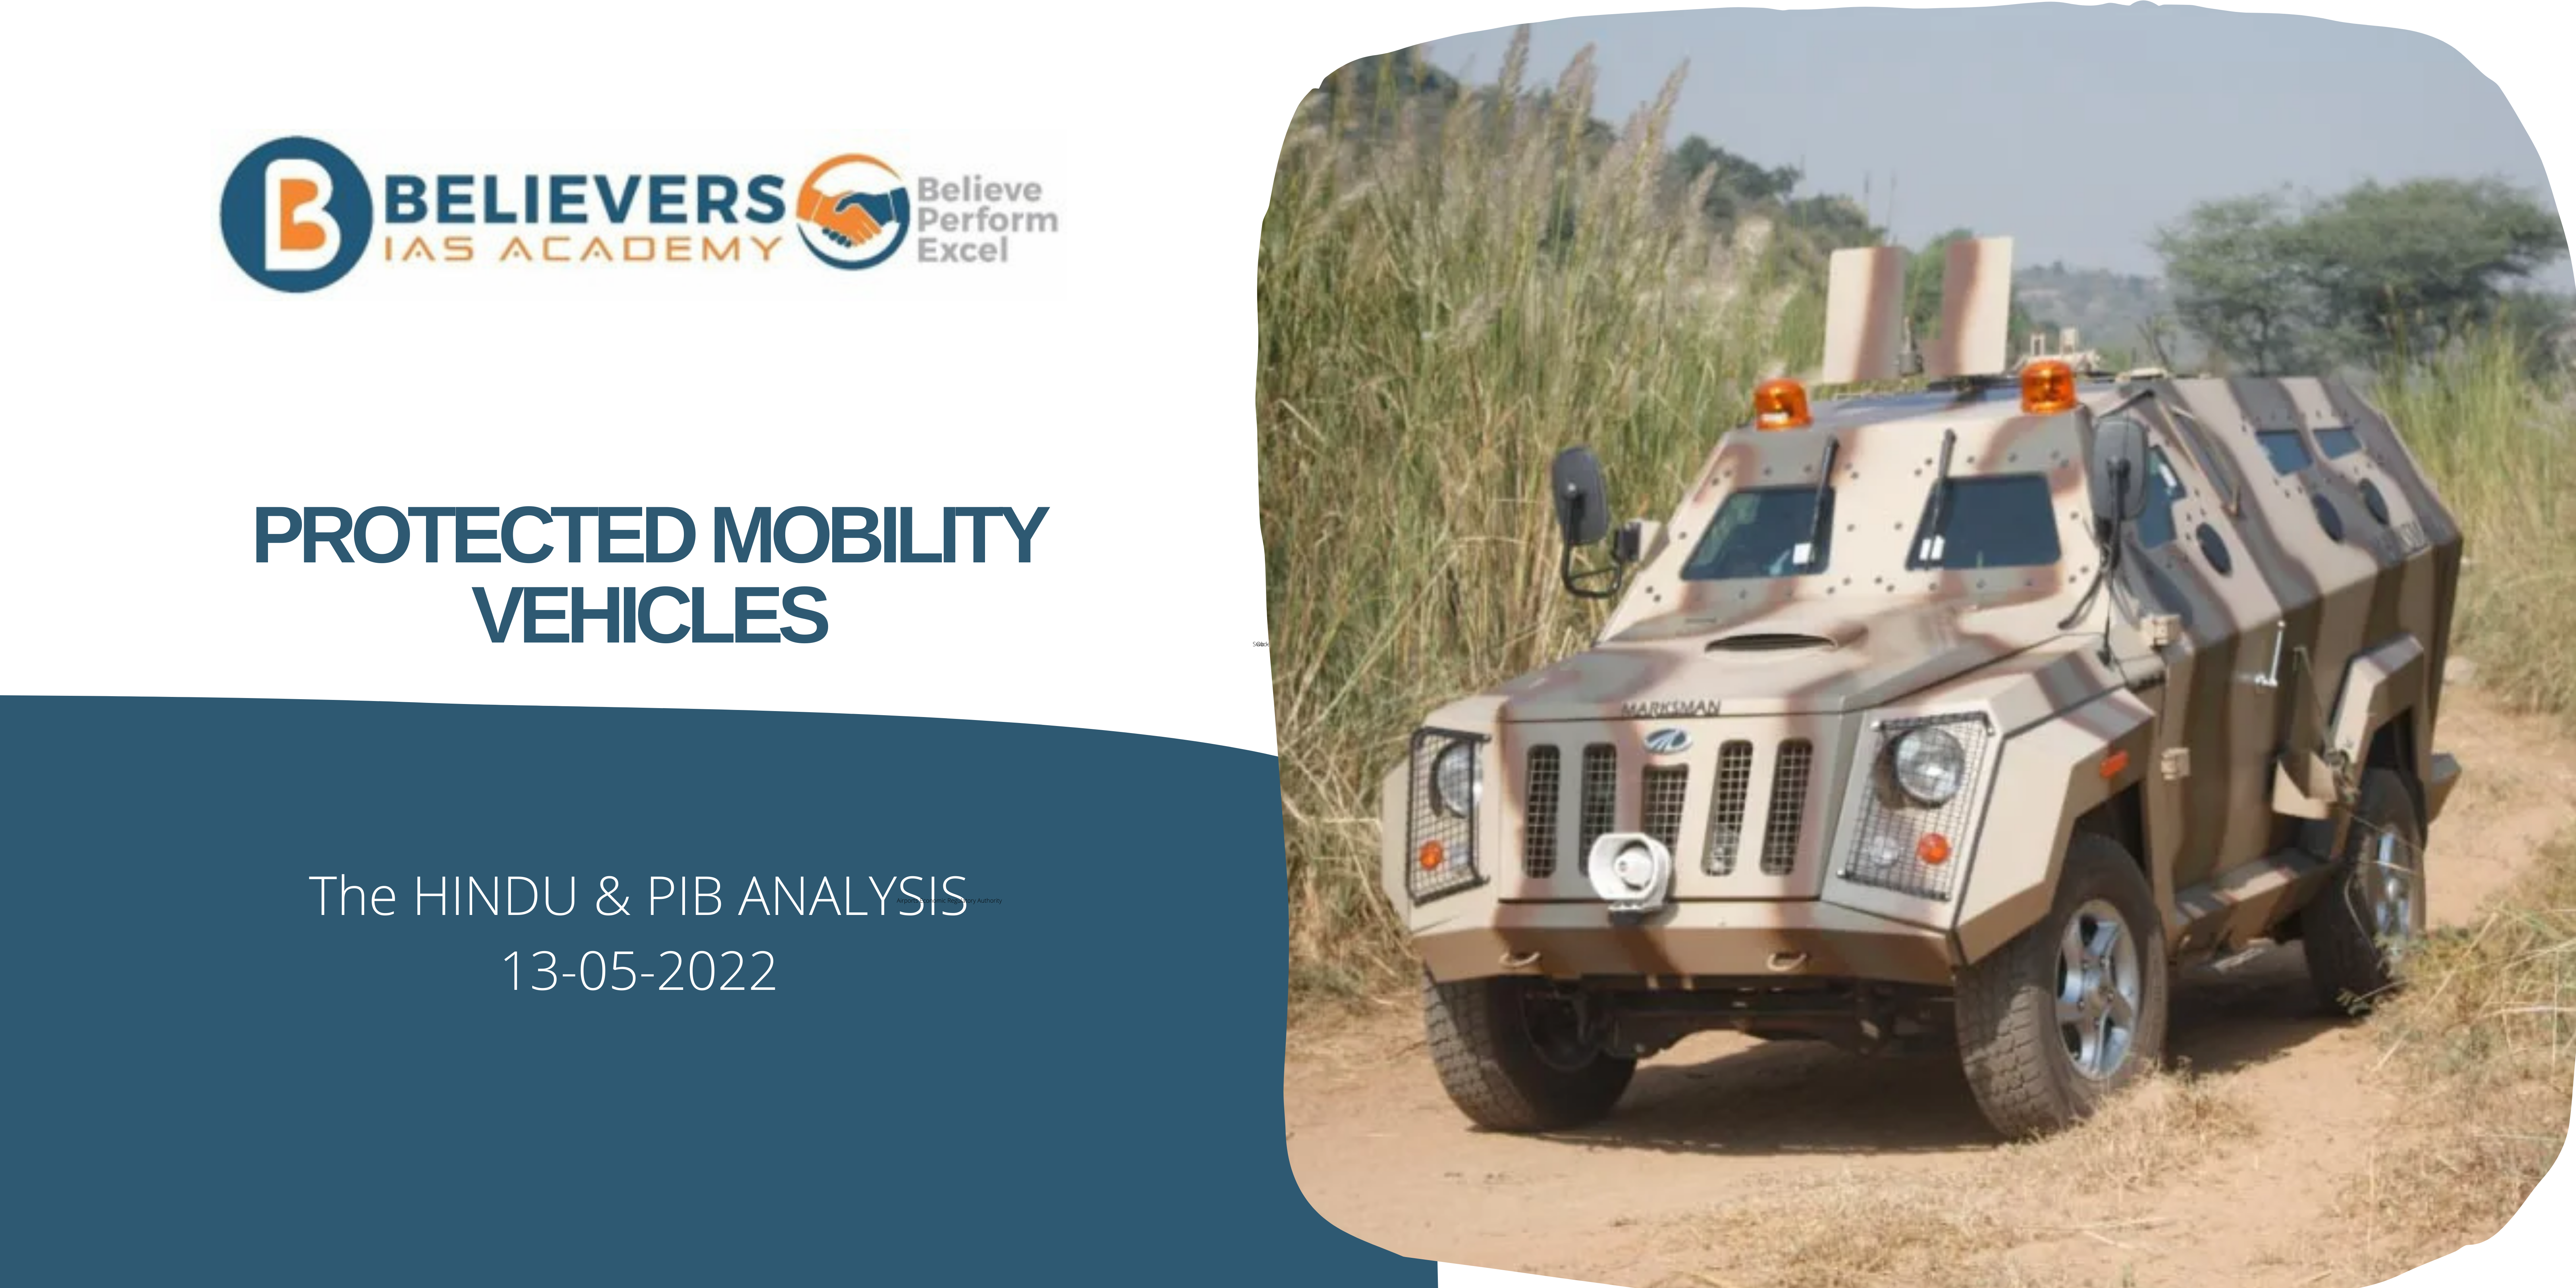 UPSC Current affairs - Protected Mobility Vehicles